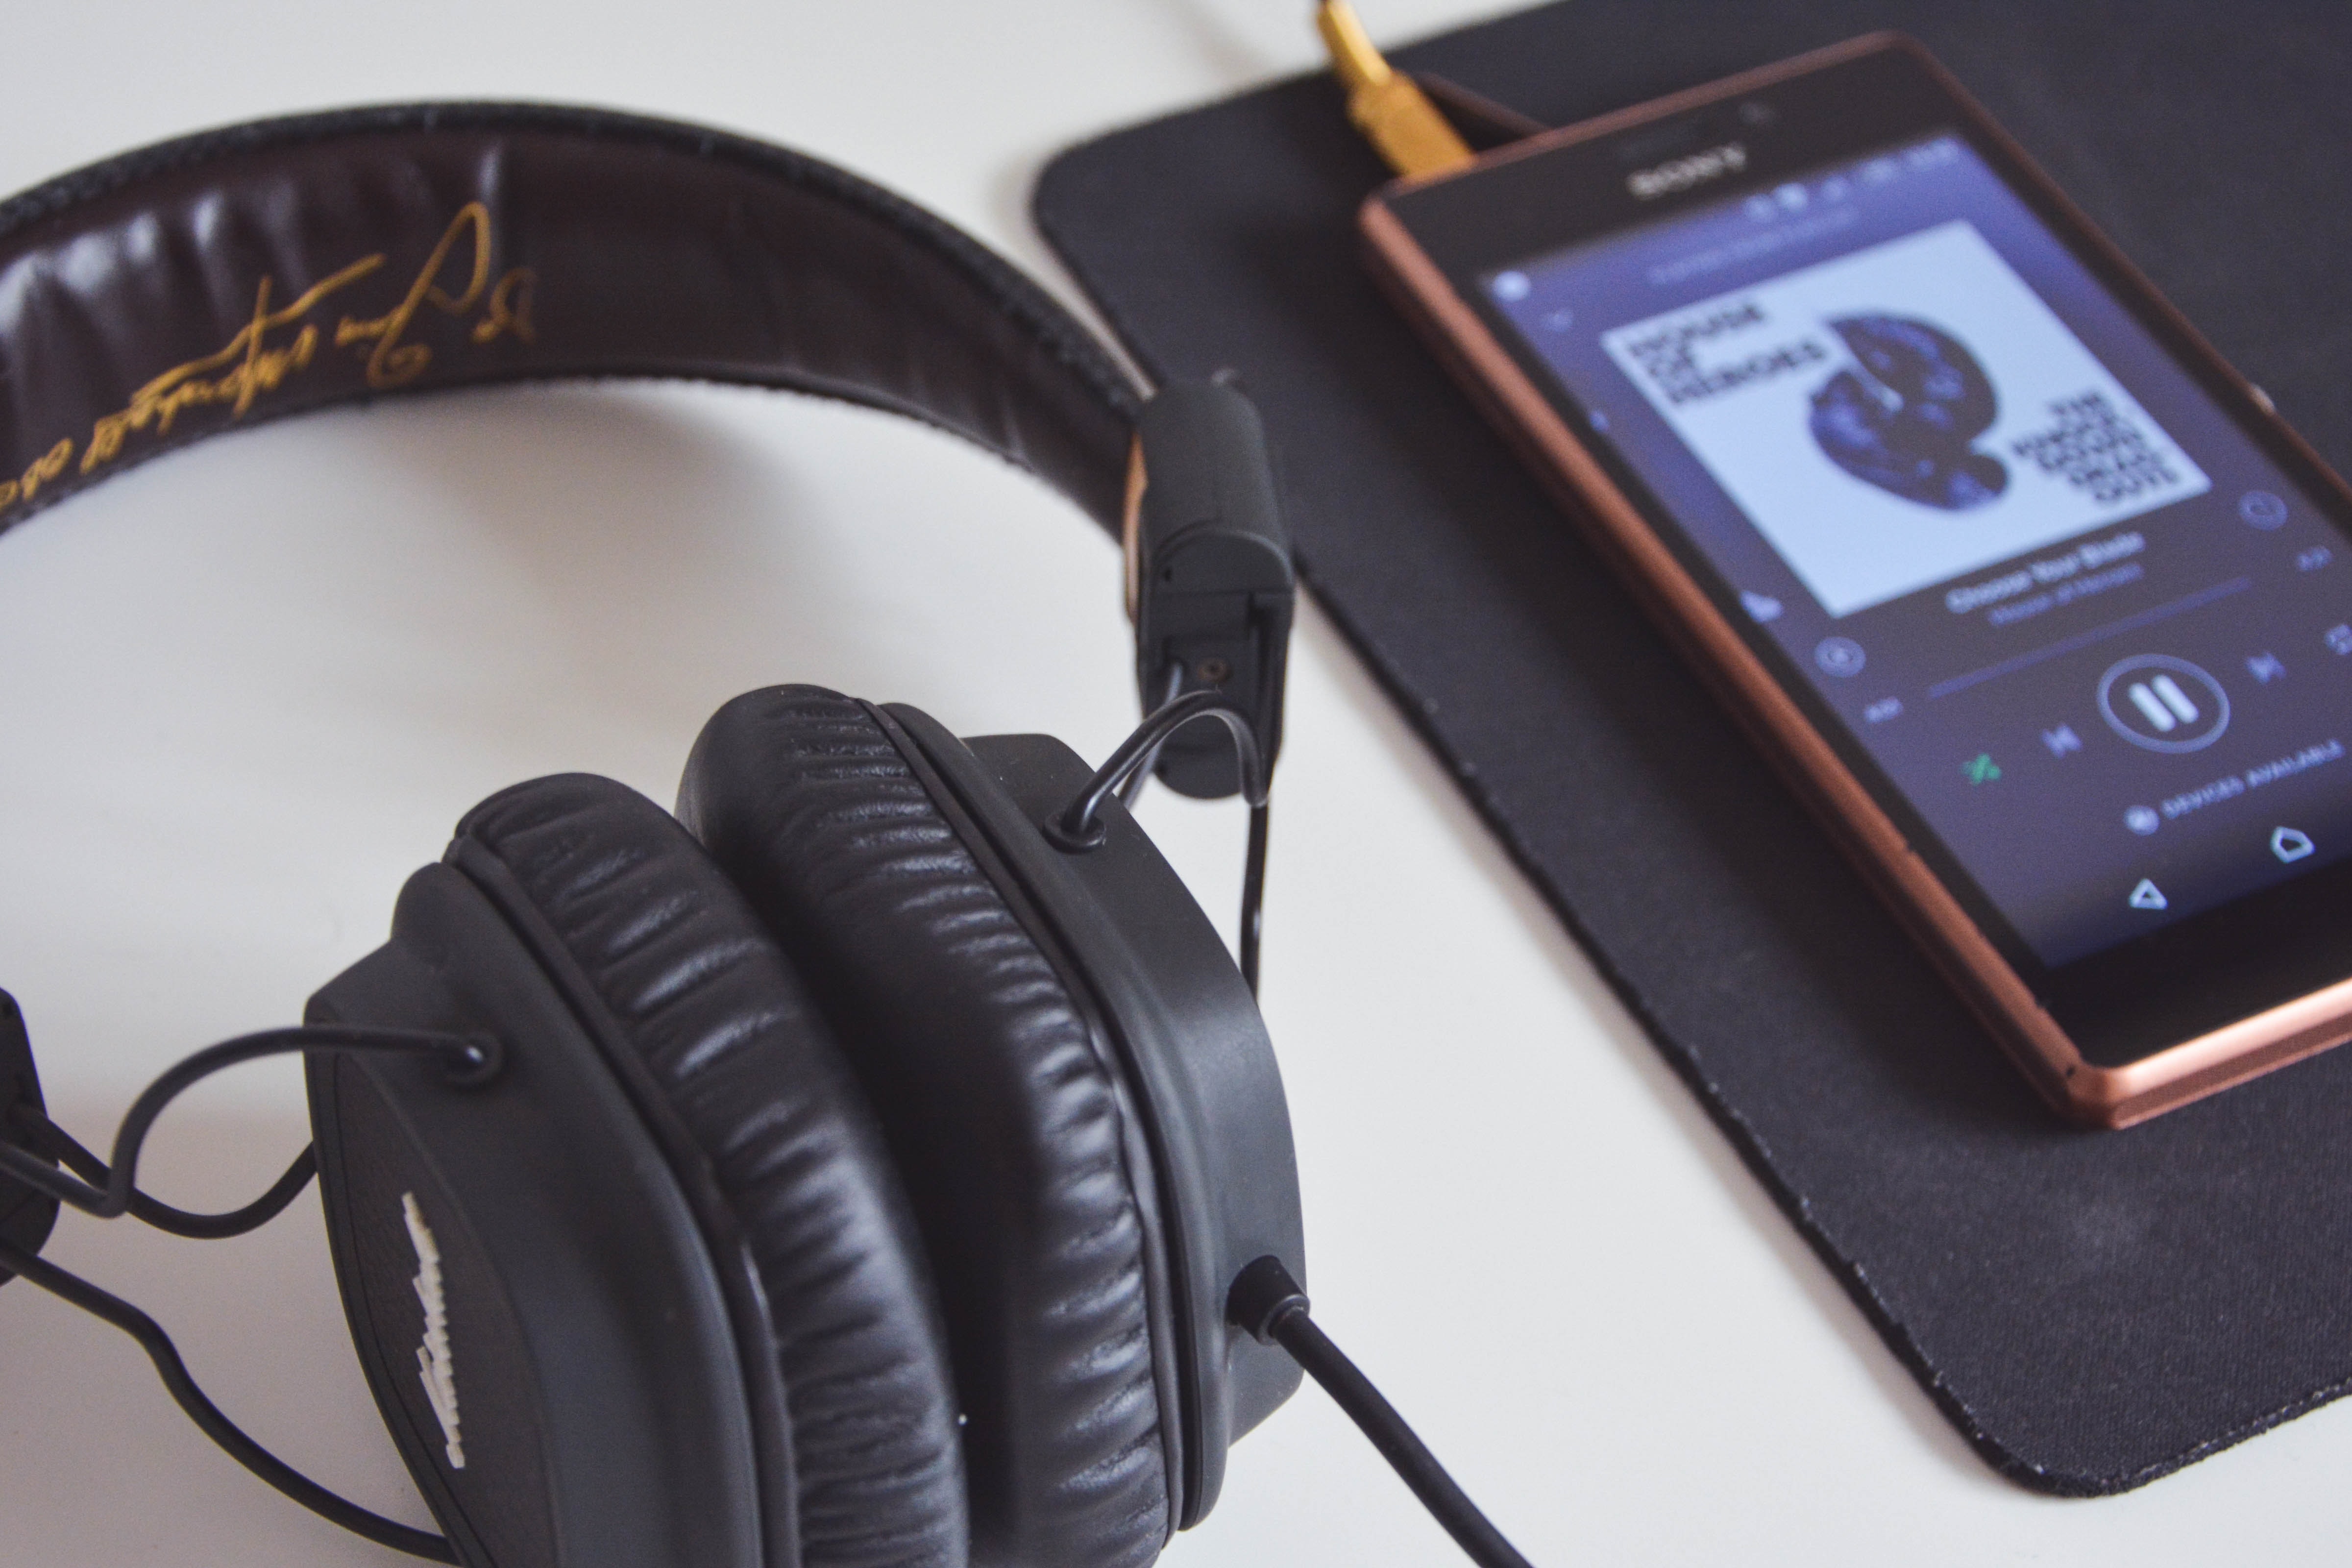 Top 3 Best Music Player Apps for Android